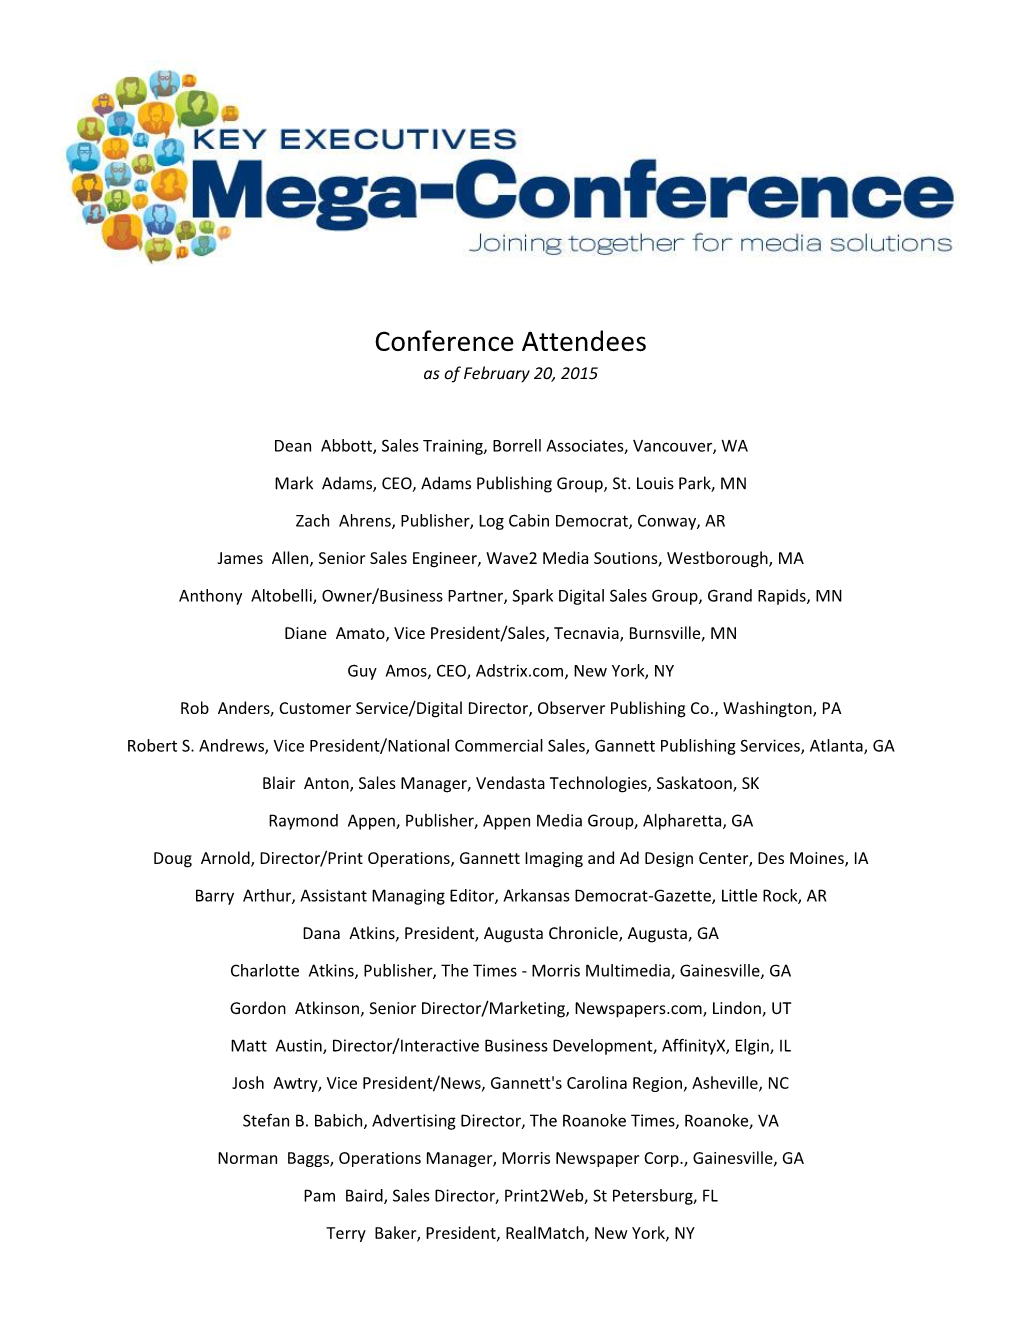 Conference Attendees As of February 20, 2015